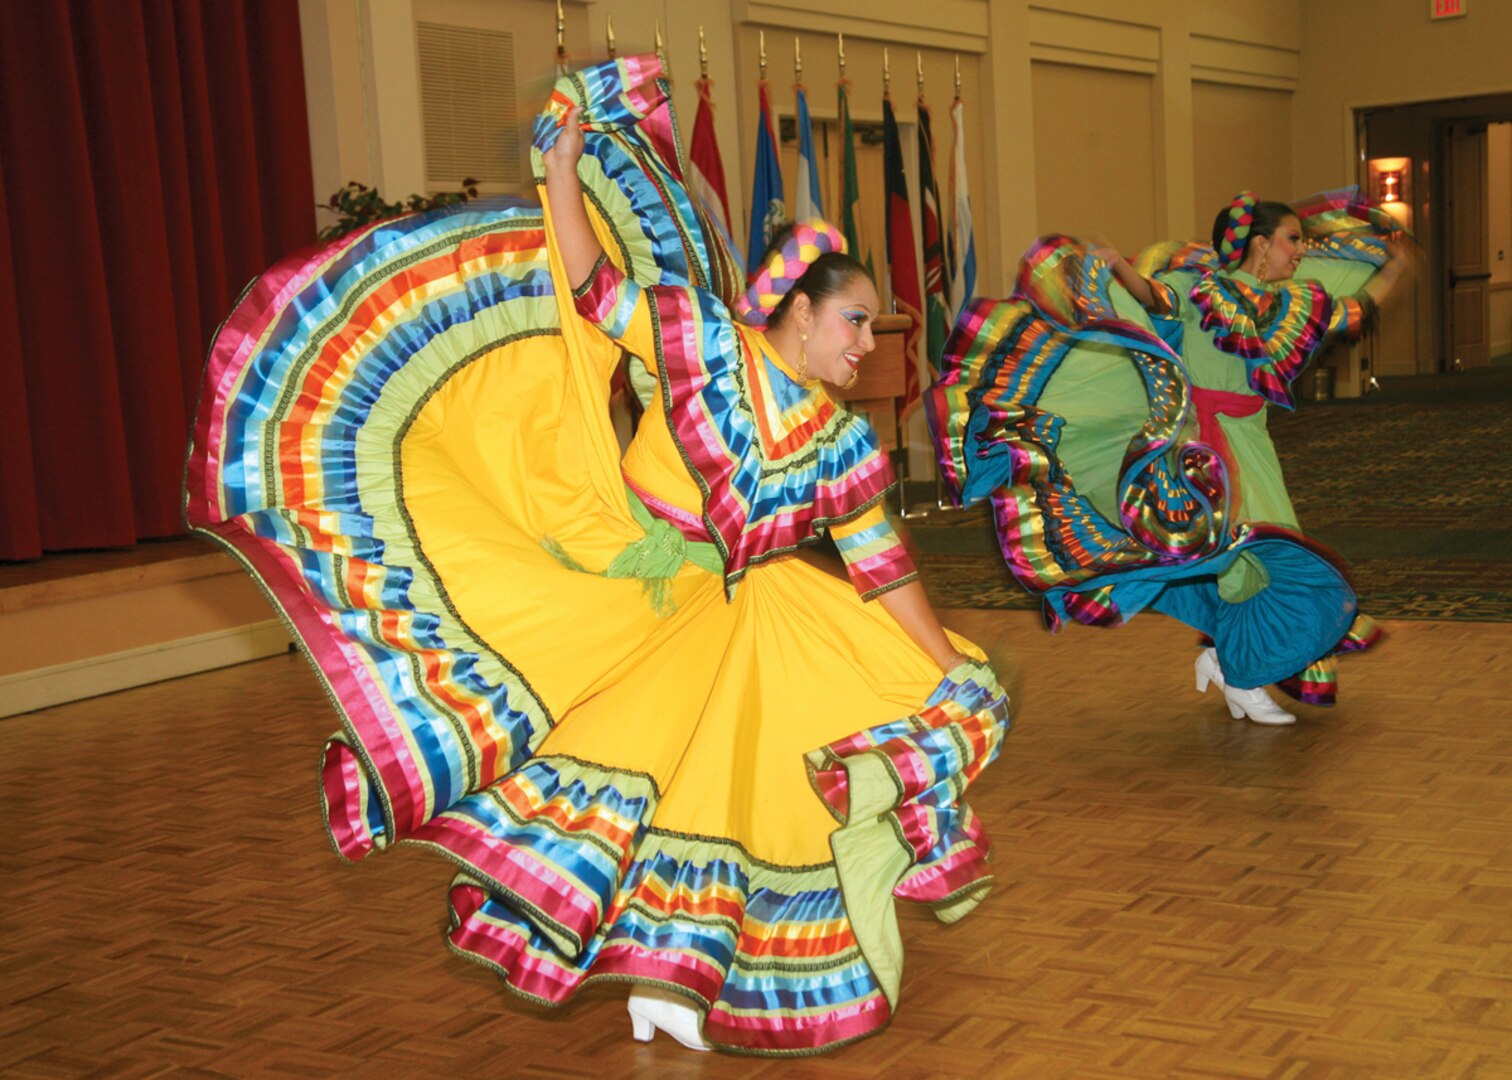 9/15/2008 - Members of the Ballet Folklorico del Cielo dance company perform during the Hispanic Heritage kickoff breakfast Sept. 15 at the Gateway Club. (USAF photo by Robbin Cresswell)